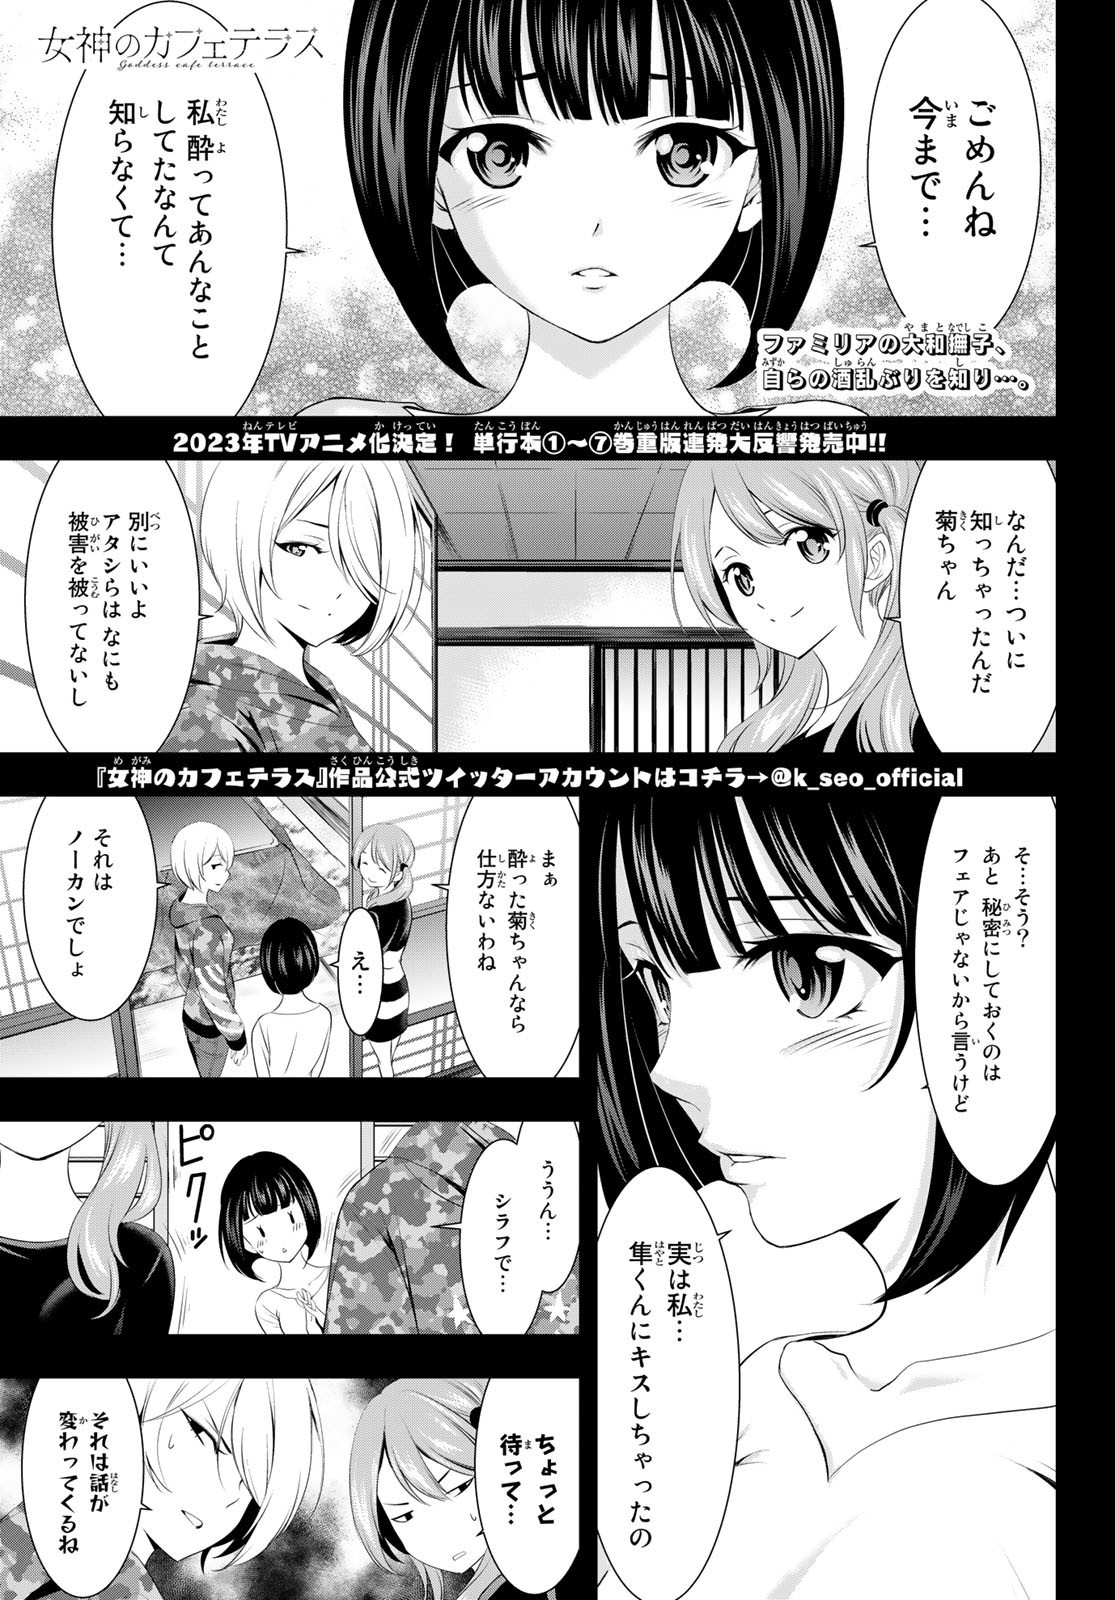 Goddess-Cafe-Terrace - Chapter 079 - Page 1